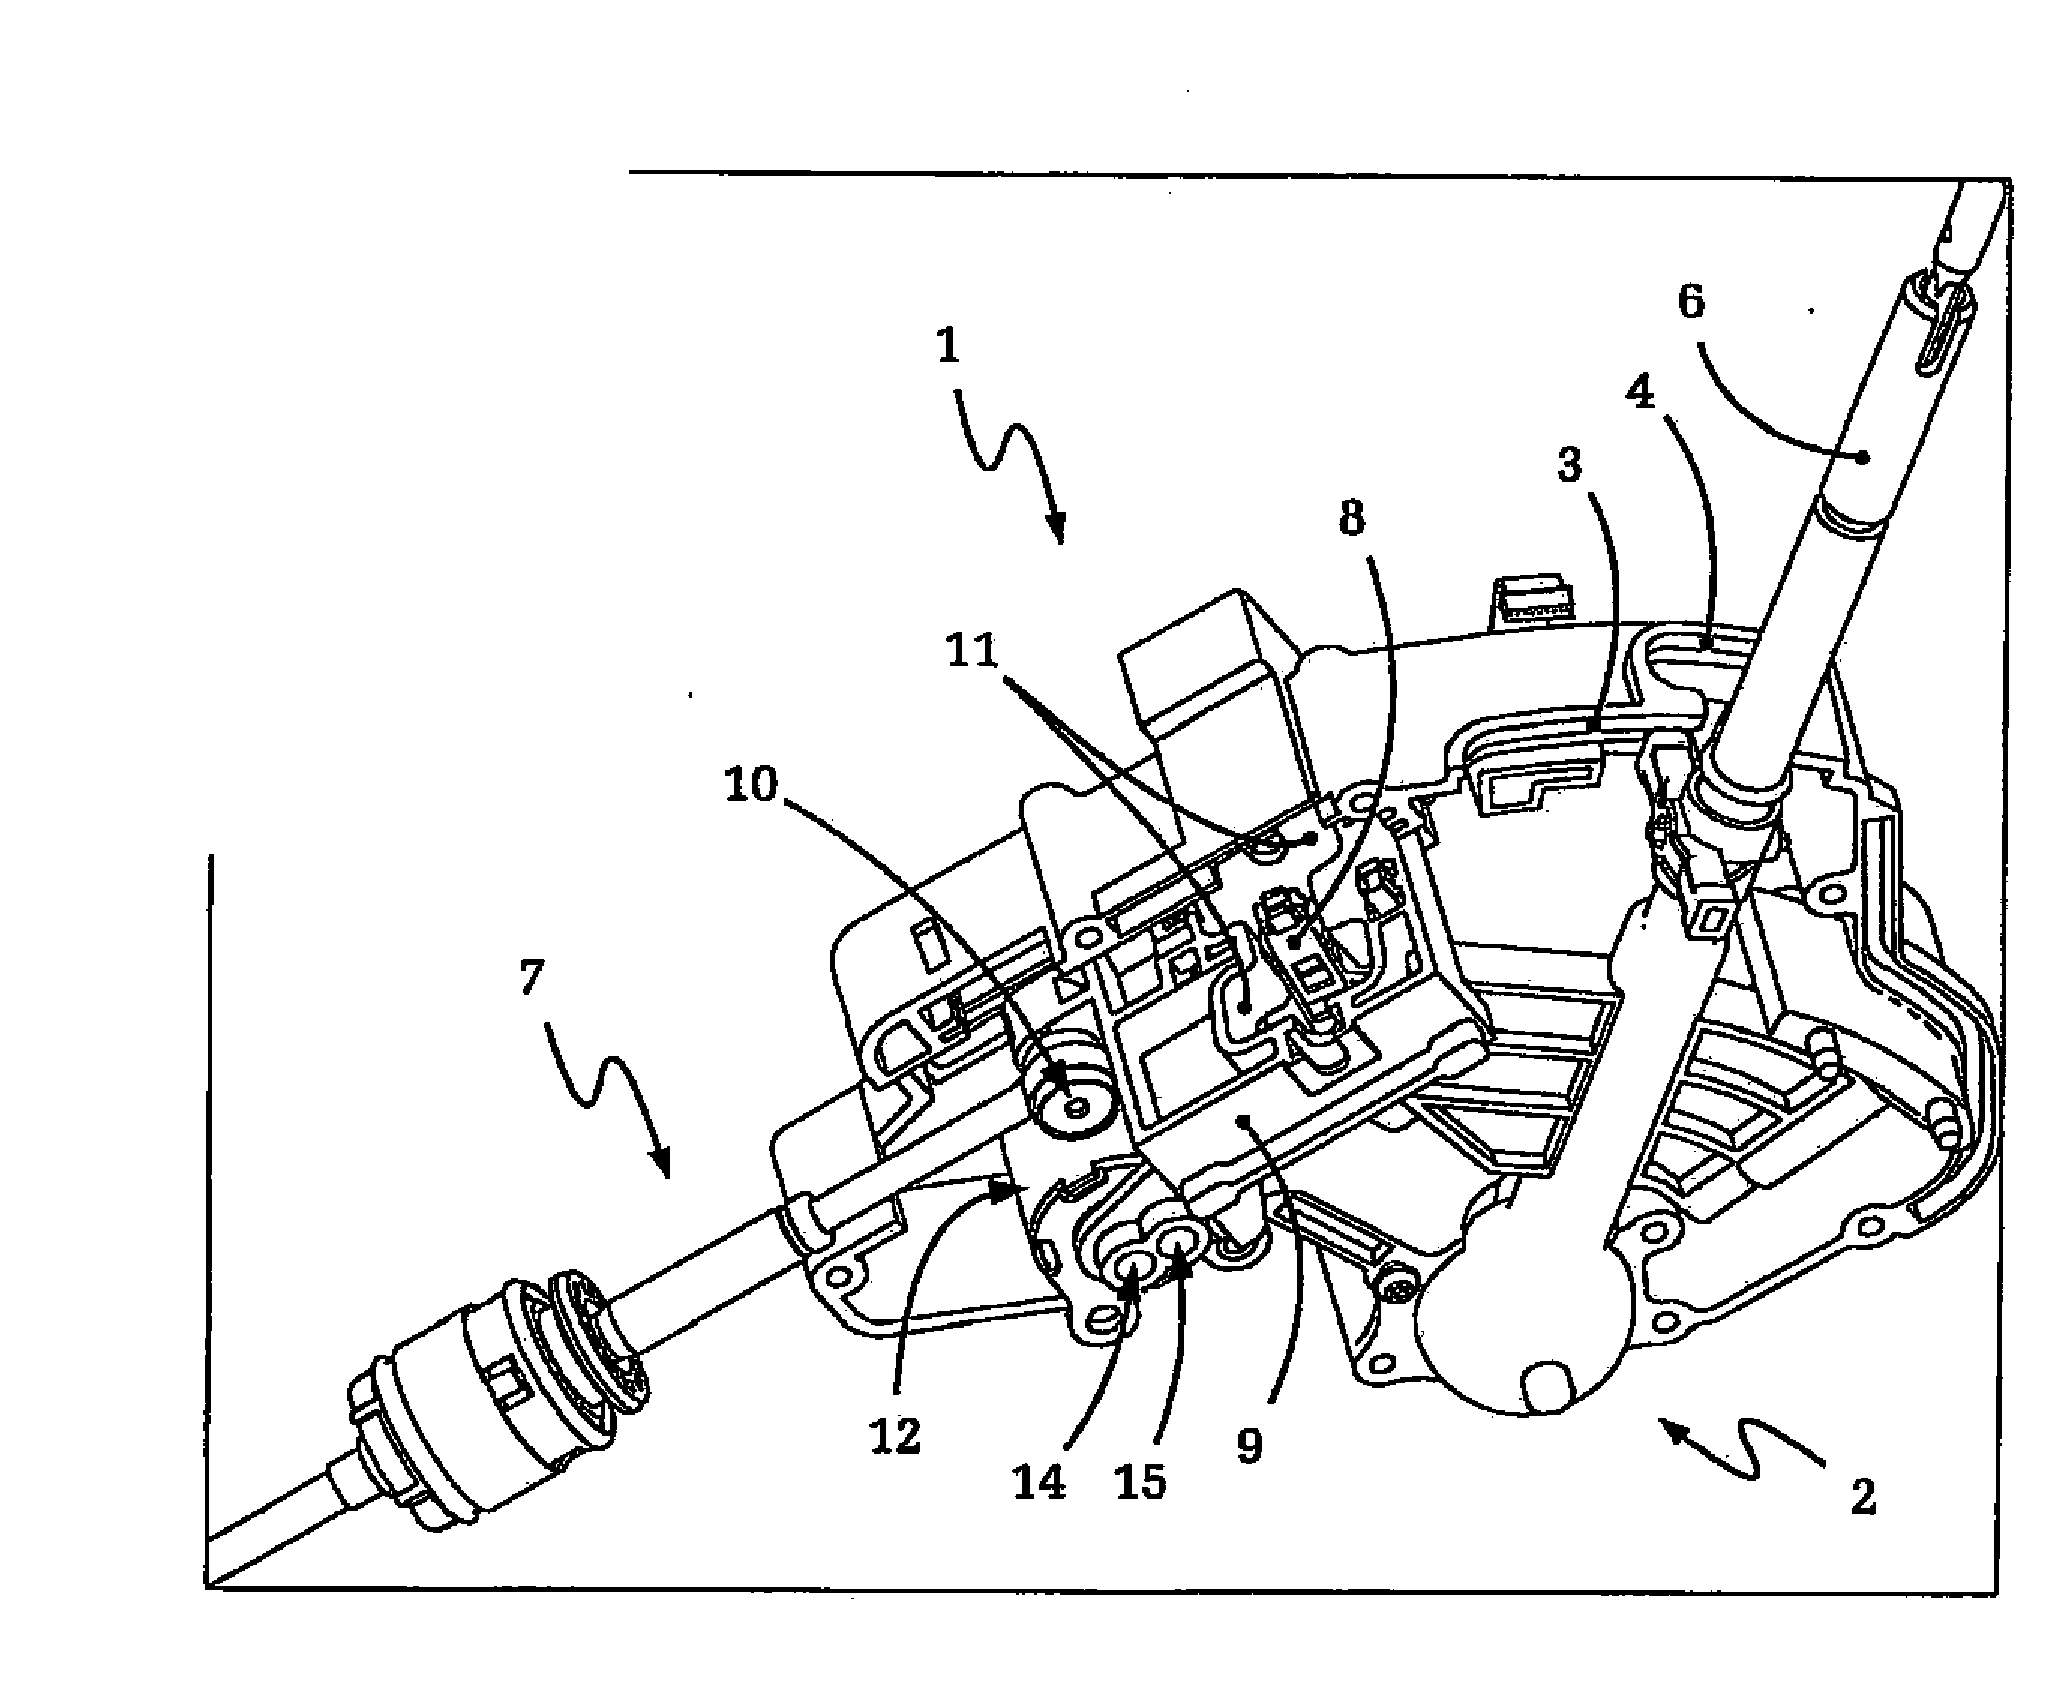 Actuating device with shift carrage lock